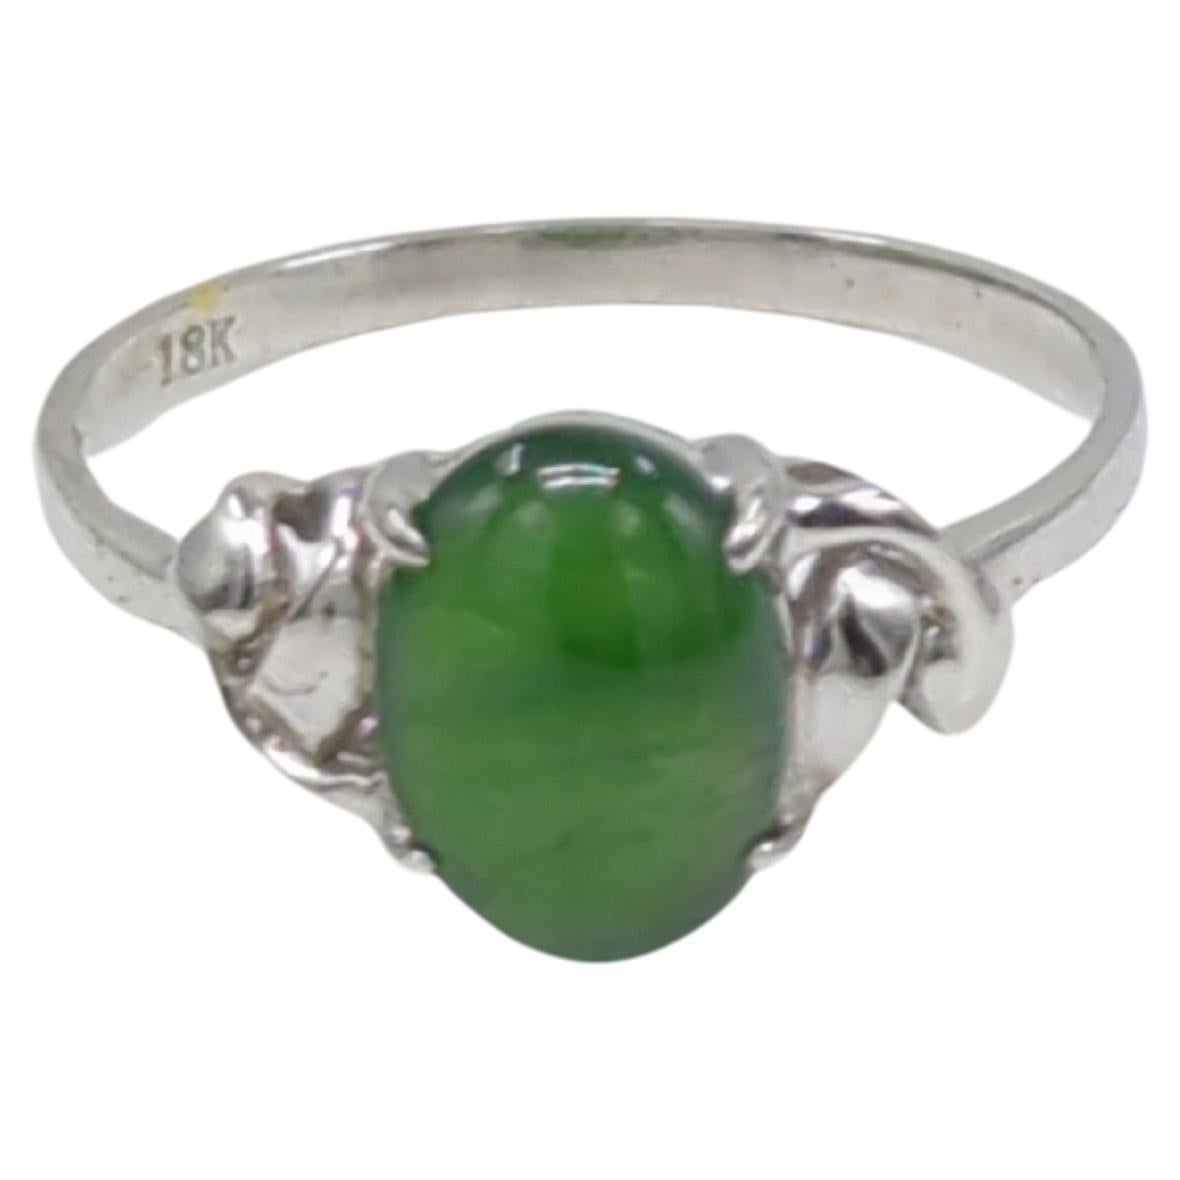 18K White Gold Translucent Deep Green Cabochon Jadeite Ring A-Grade Size 6 For Sale 3